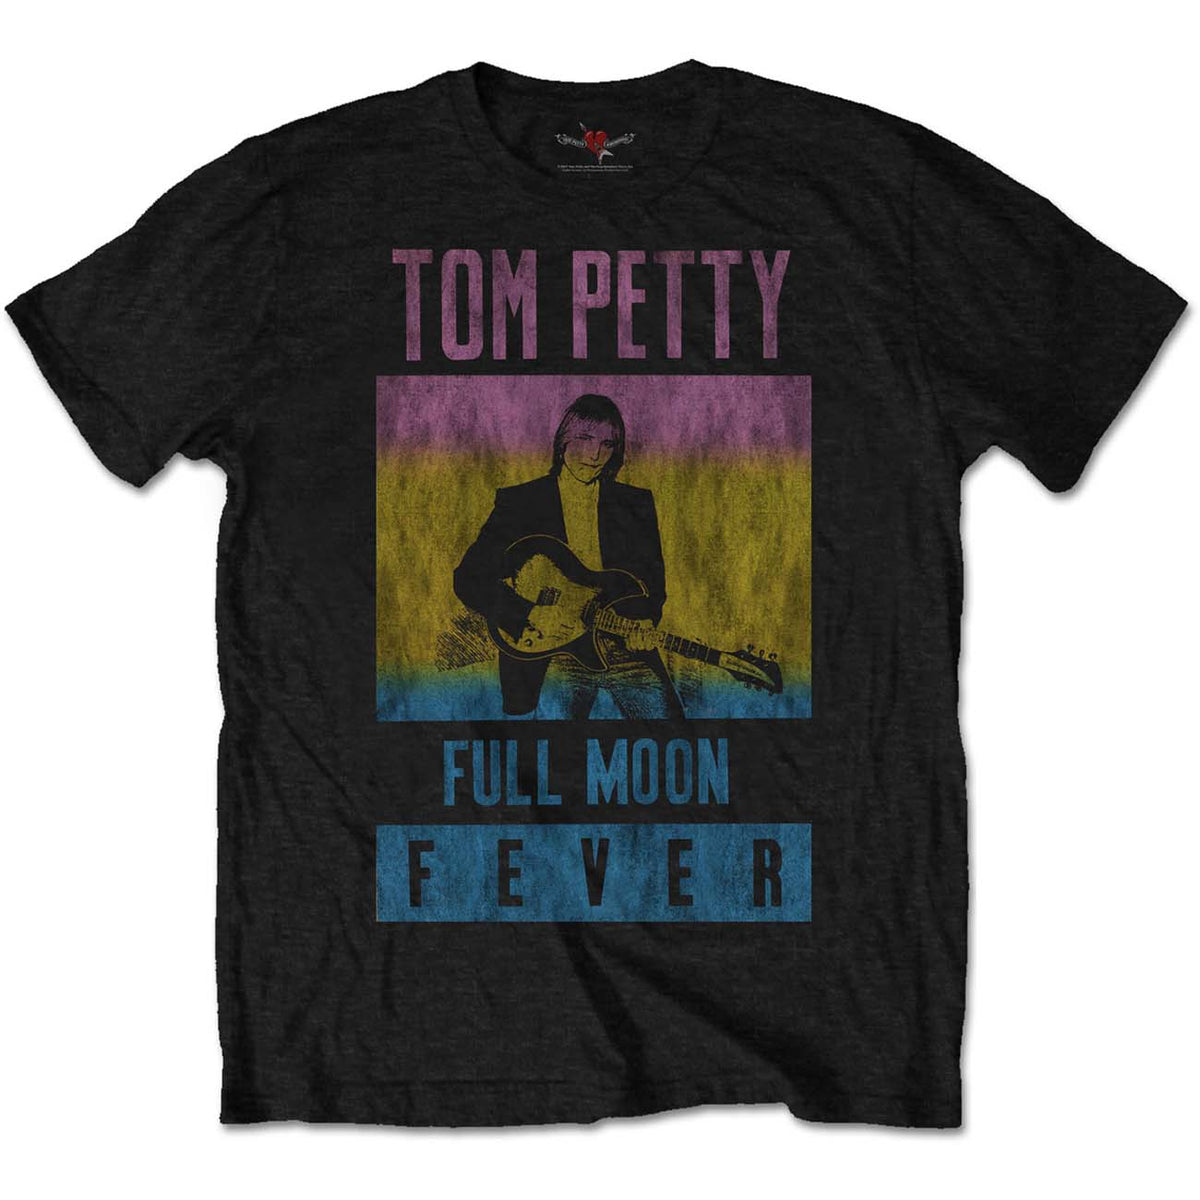 Tom Petty & the Heartbreakers Unisex T-Shirt - Full Moon Fever  -Black Official Product